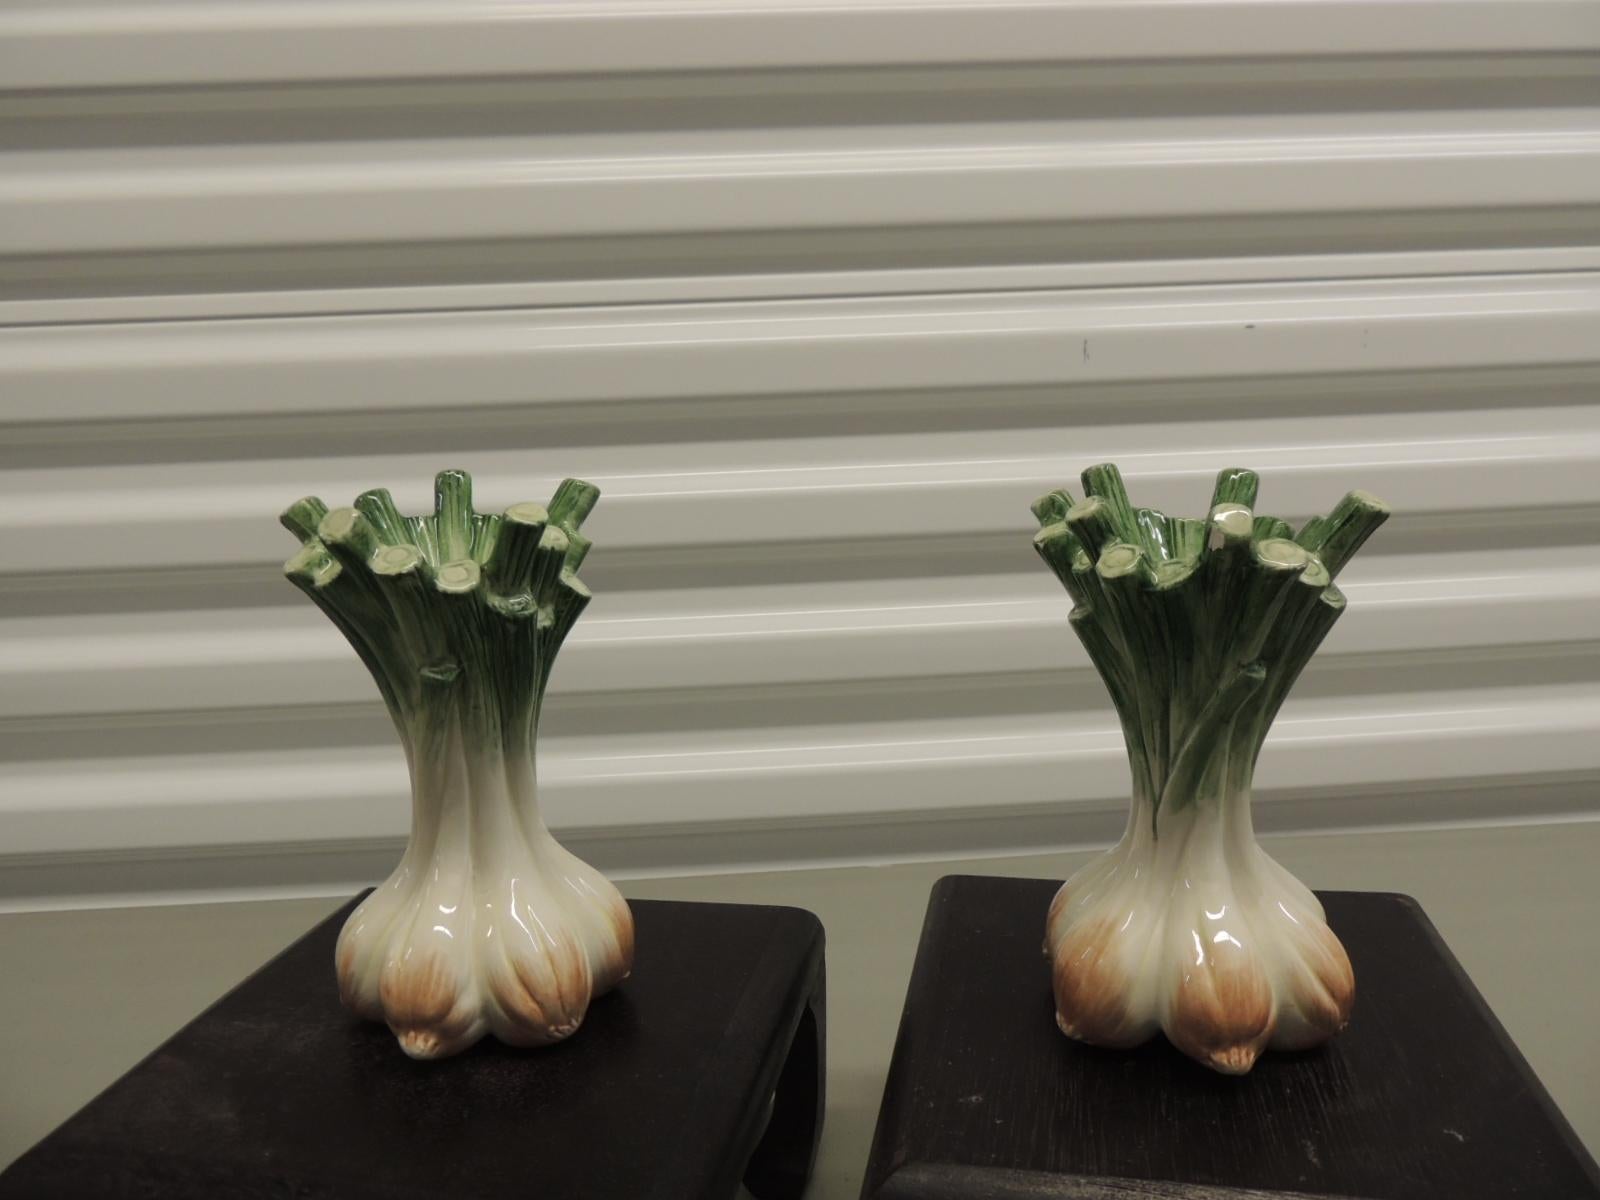 Pair of hand painted green and white ceramic onions candlesticks
Hand painted ceramic onion candleholders.
From Fitz & Floyd.
Stand not included
Measures: 6 x 3 x 3.